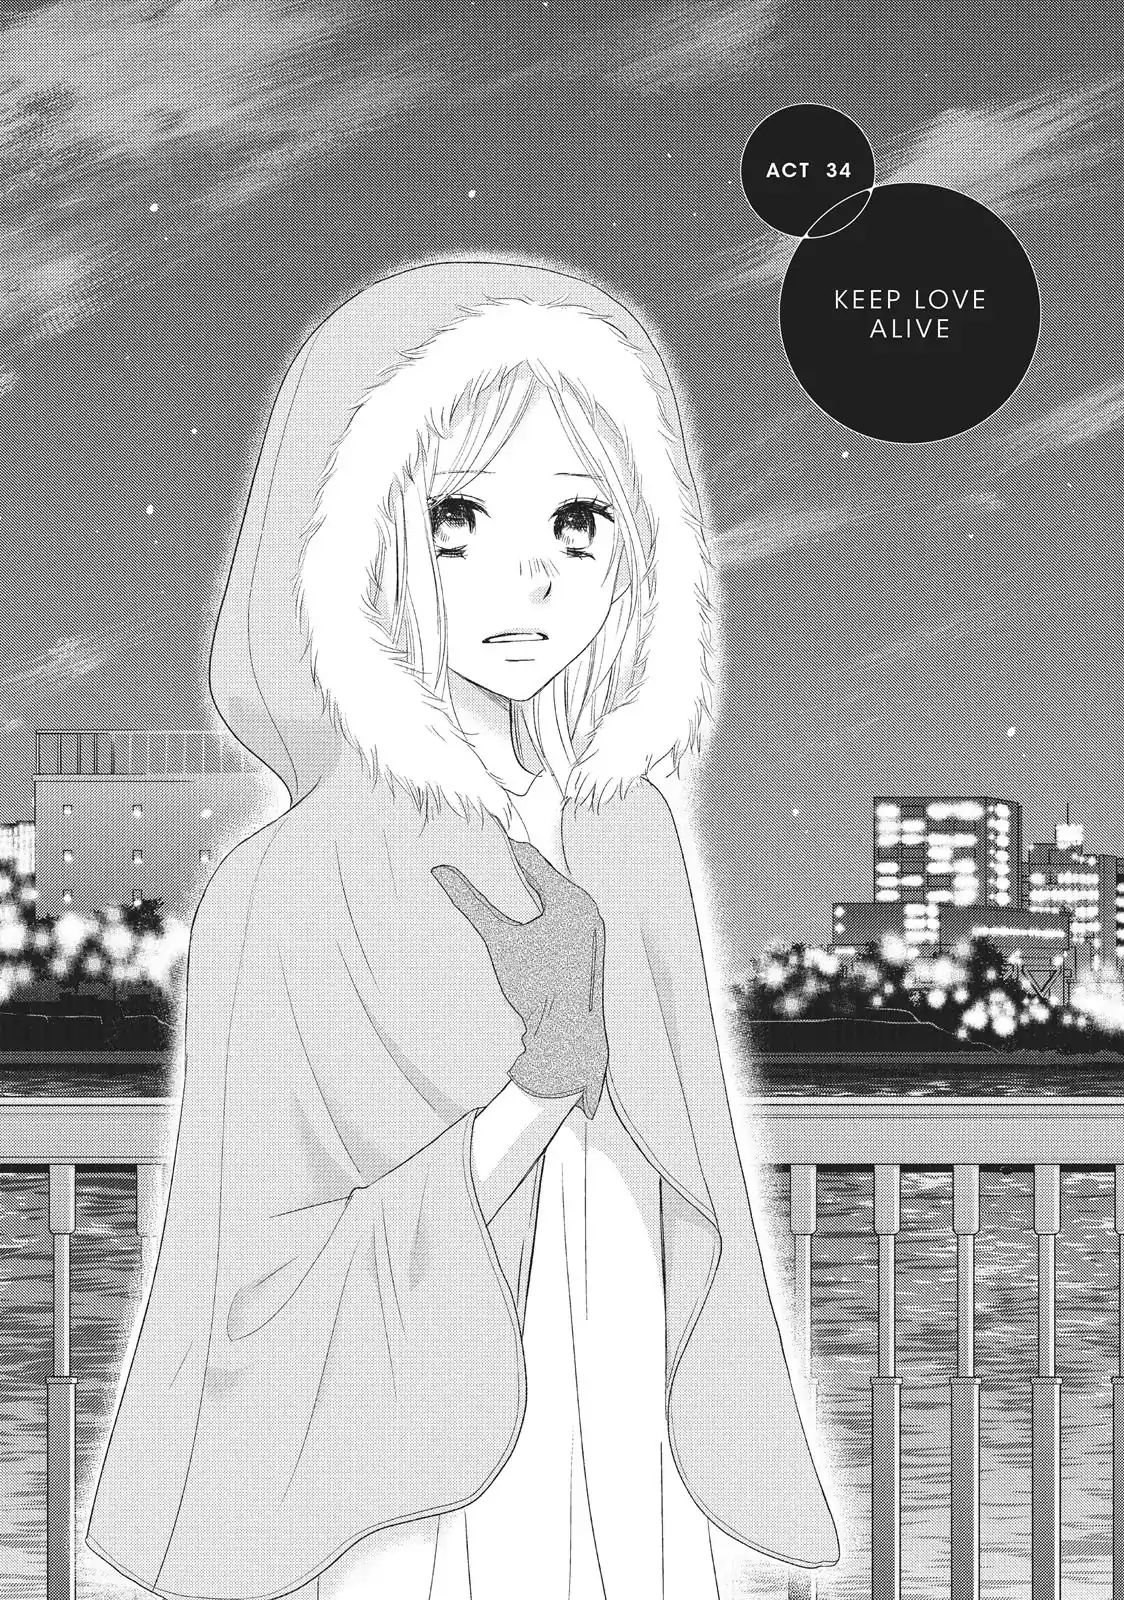 Perfect World (ARUGA Rie) - chapter 34 - #1